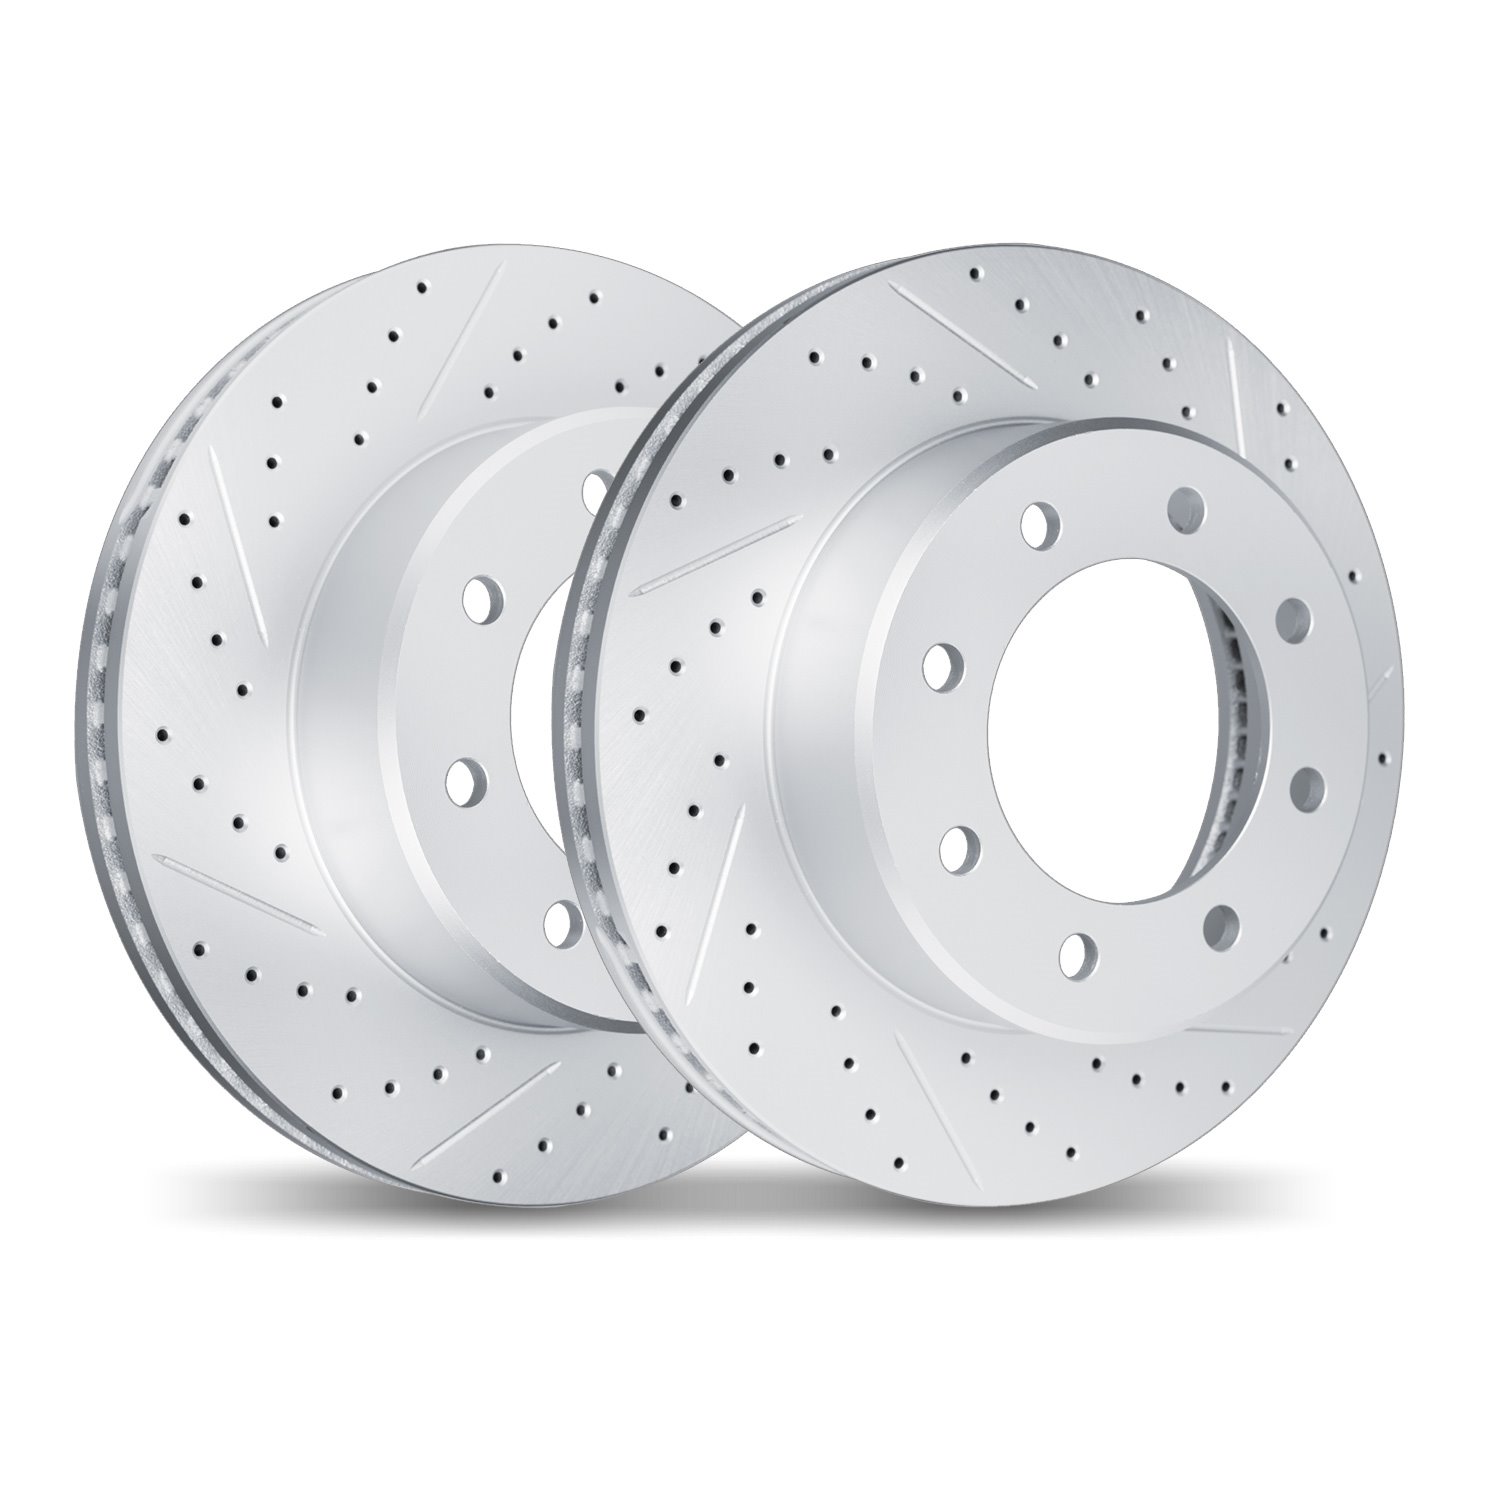 2002-54061 Geoperformance Drilled/Slotted Brake Rotors, 1995-1999 Ford/Lincoln/Mercury/Mazda, Position: Front